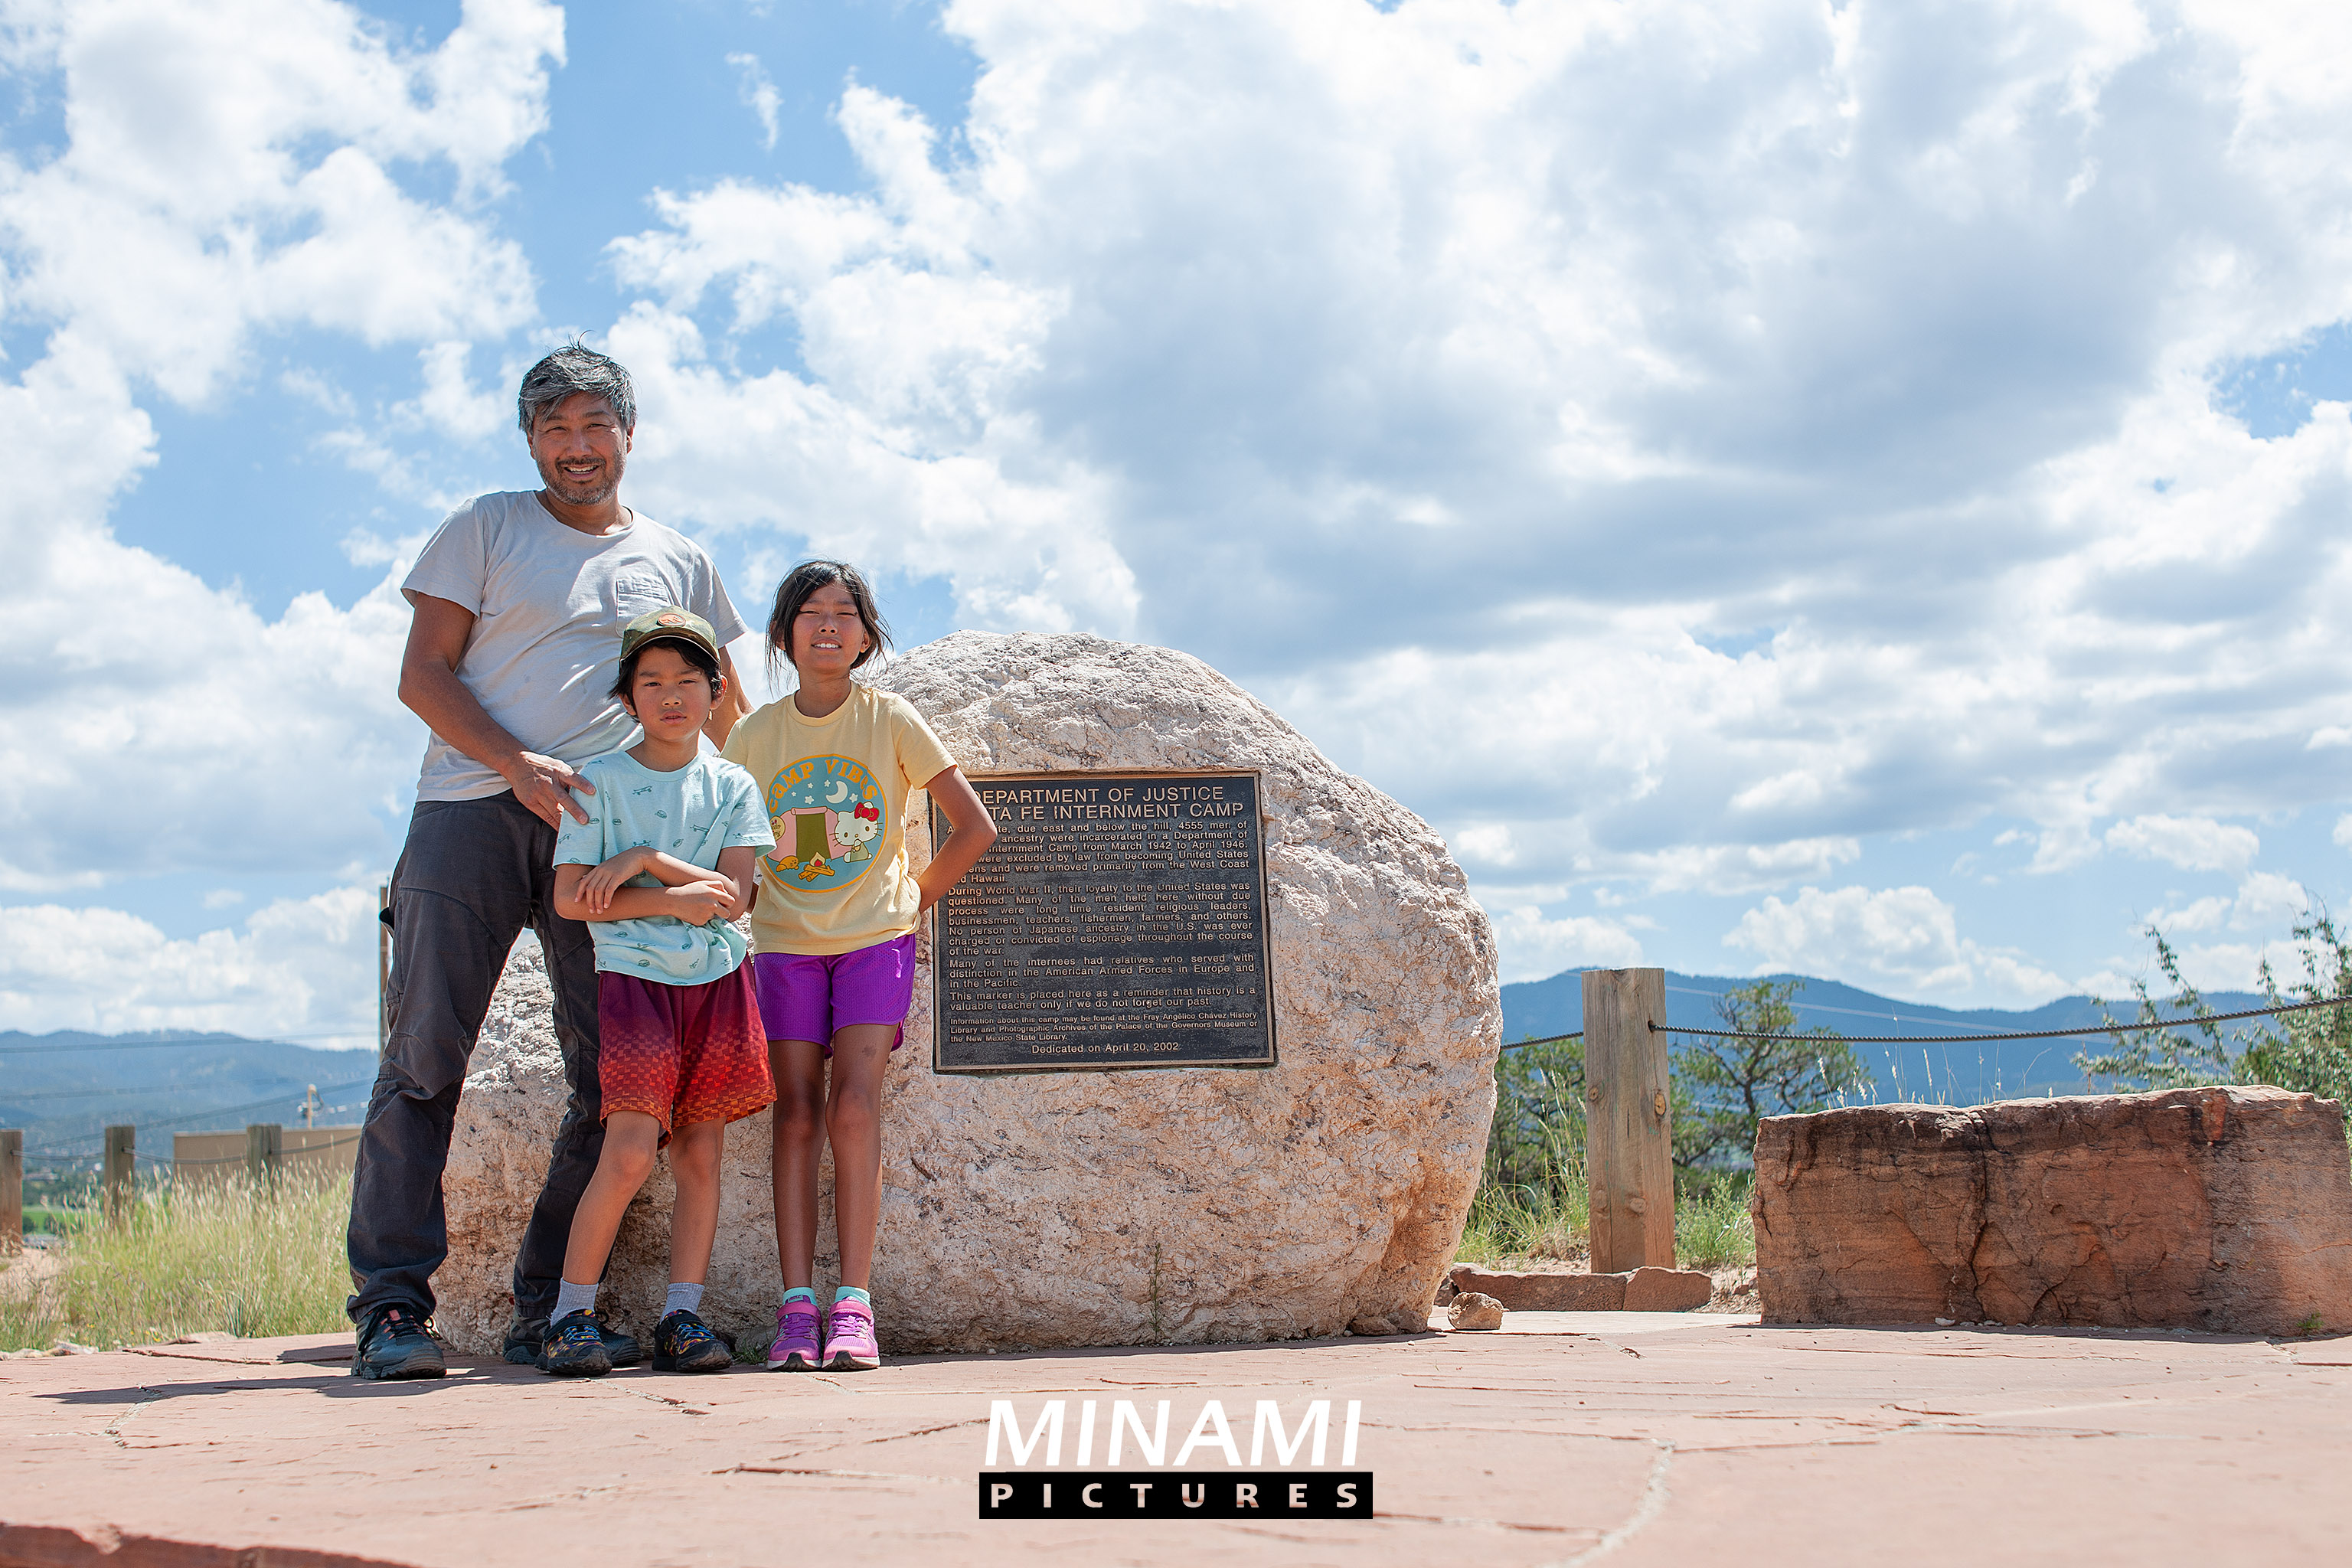 I try to give my kids a somewhat authentic understanding of their history. So we trekked from the Santa Fe Depot to the internment camp site where their great great grandfather was imprisoned during World War II. Did it work? They felt like prisoners on a forced march and I’m not sure if my point was well made. #santafe #santafeinternmentcamp